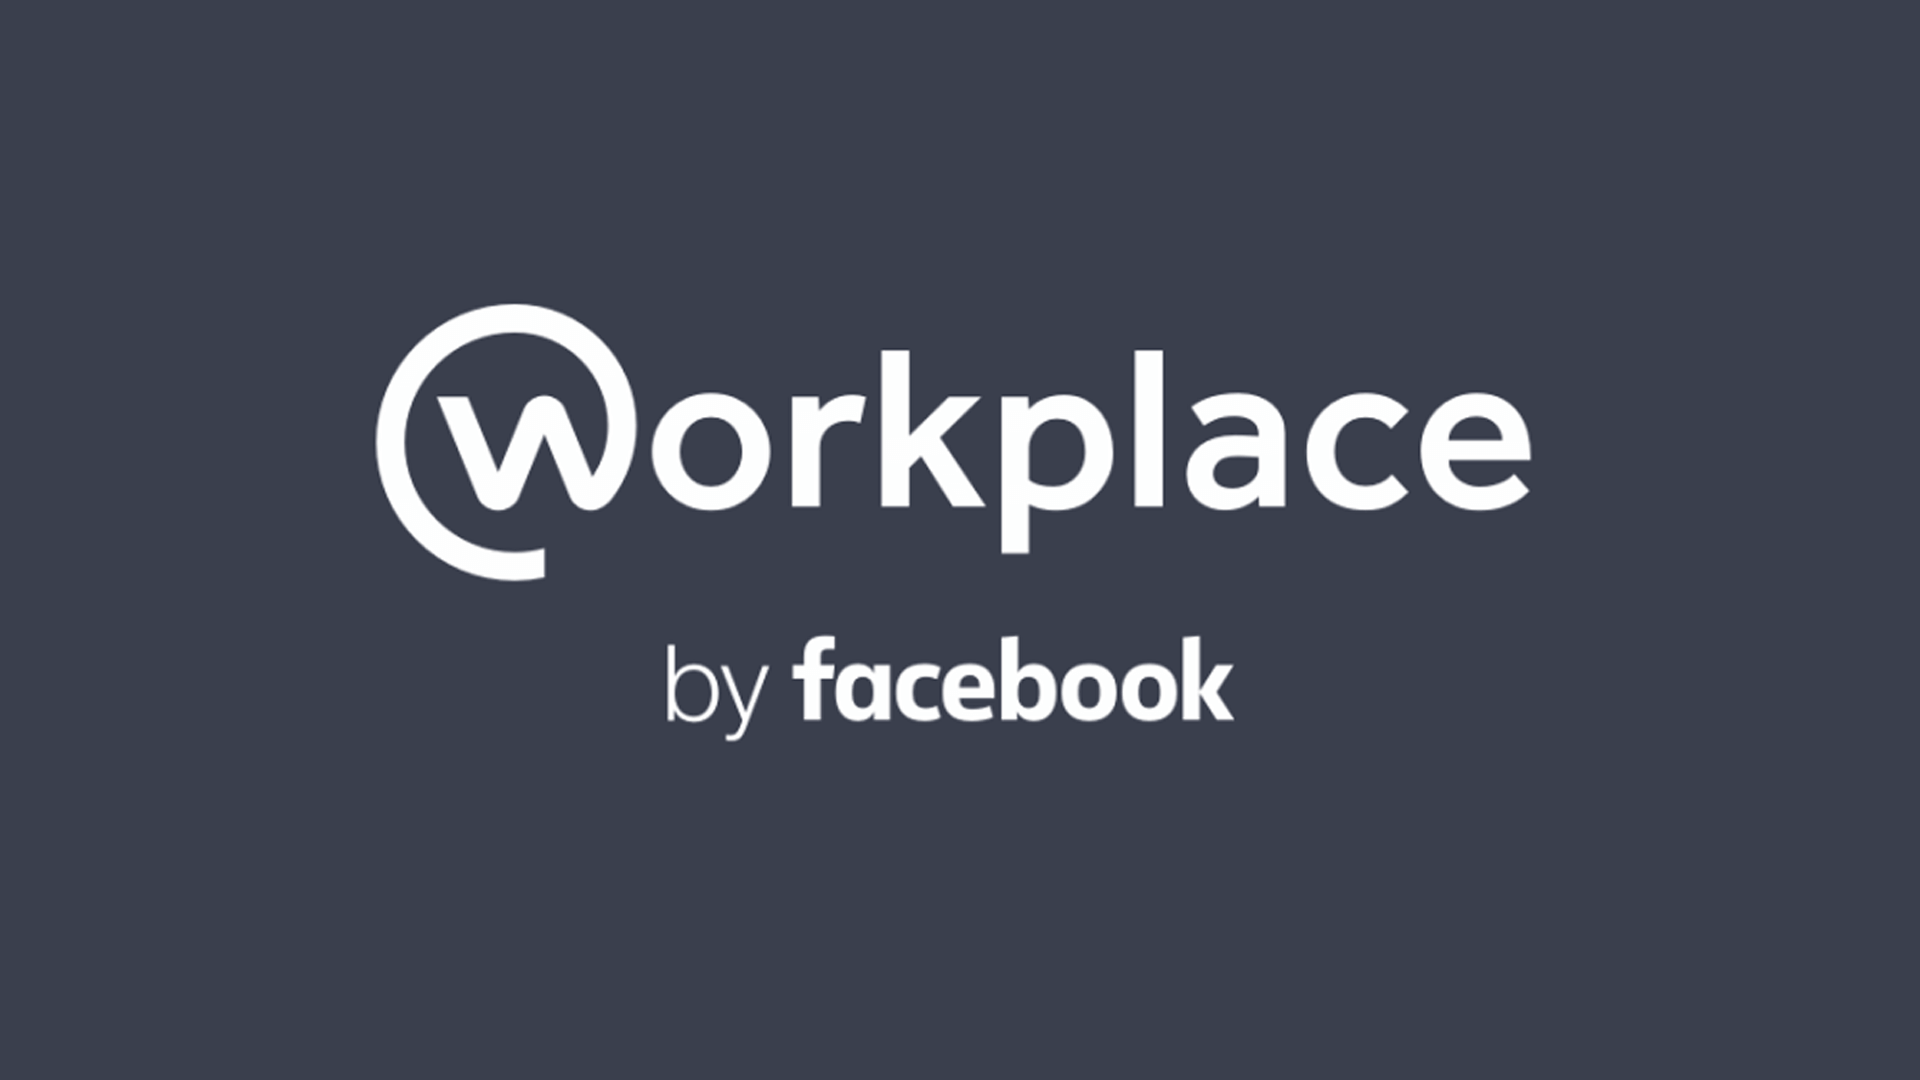 Facebook Globe Logo - Workplace by Facebook opens to organizations across the globe